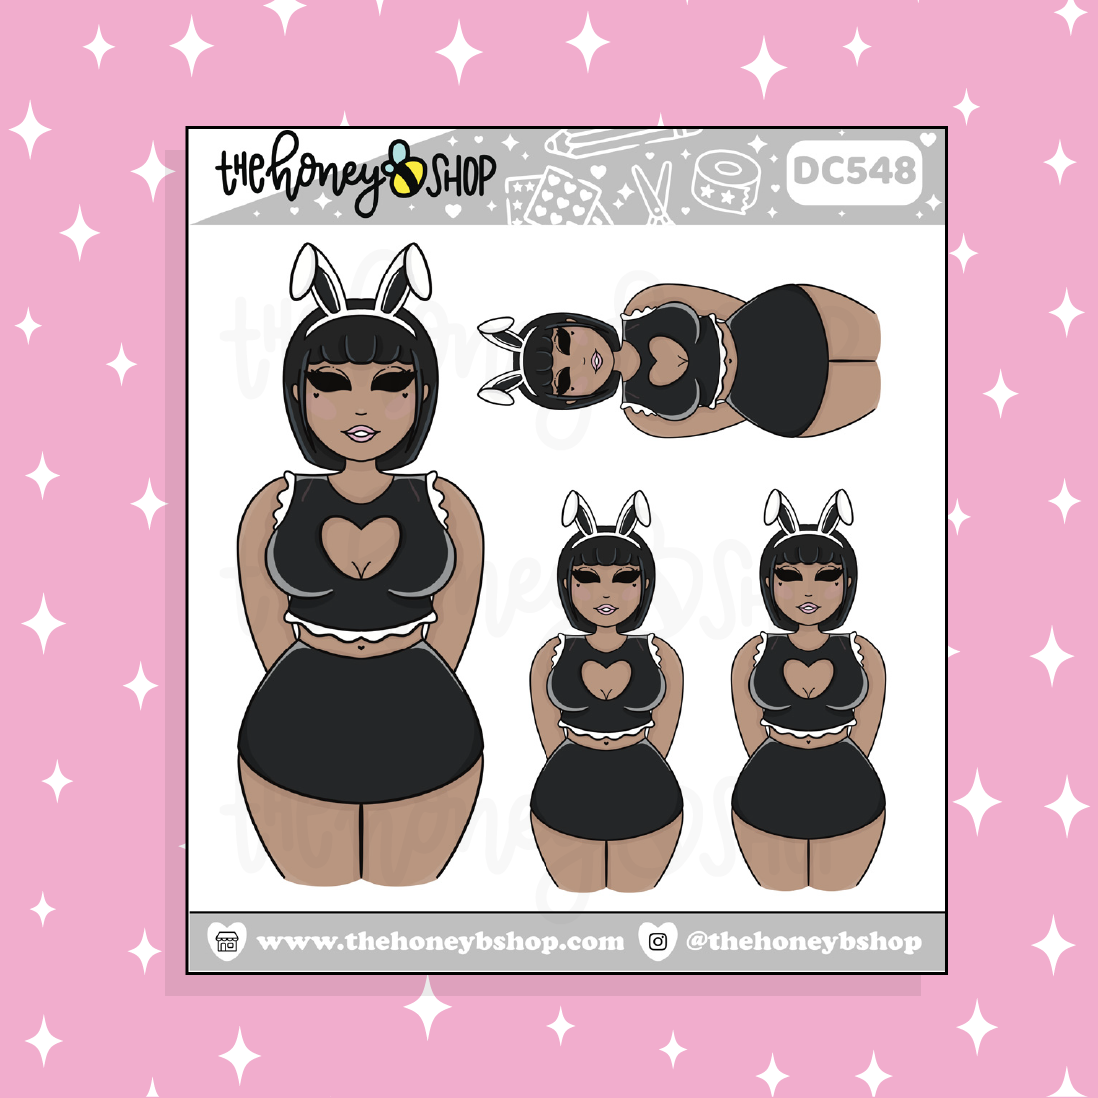 Bunny Babe Version 2 Doodle Sticker | Choose your Skin Tone!